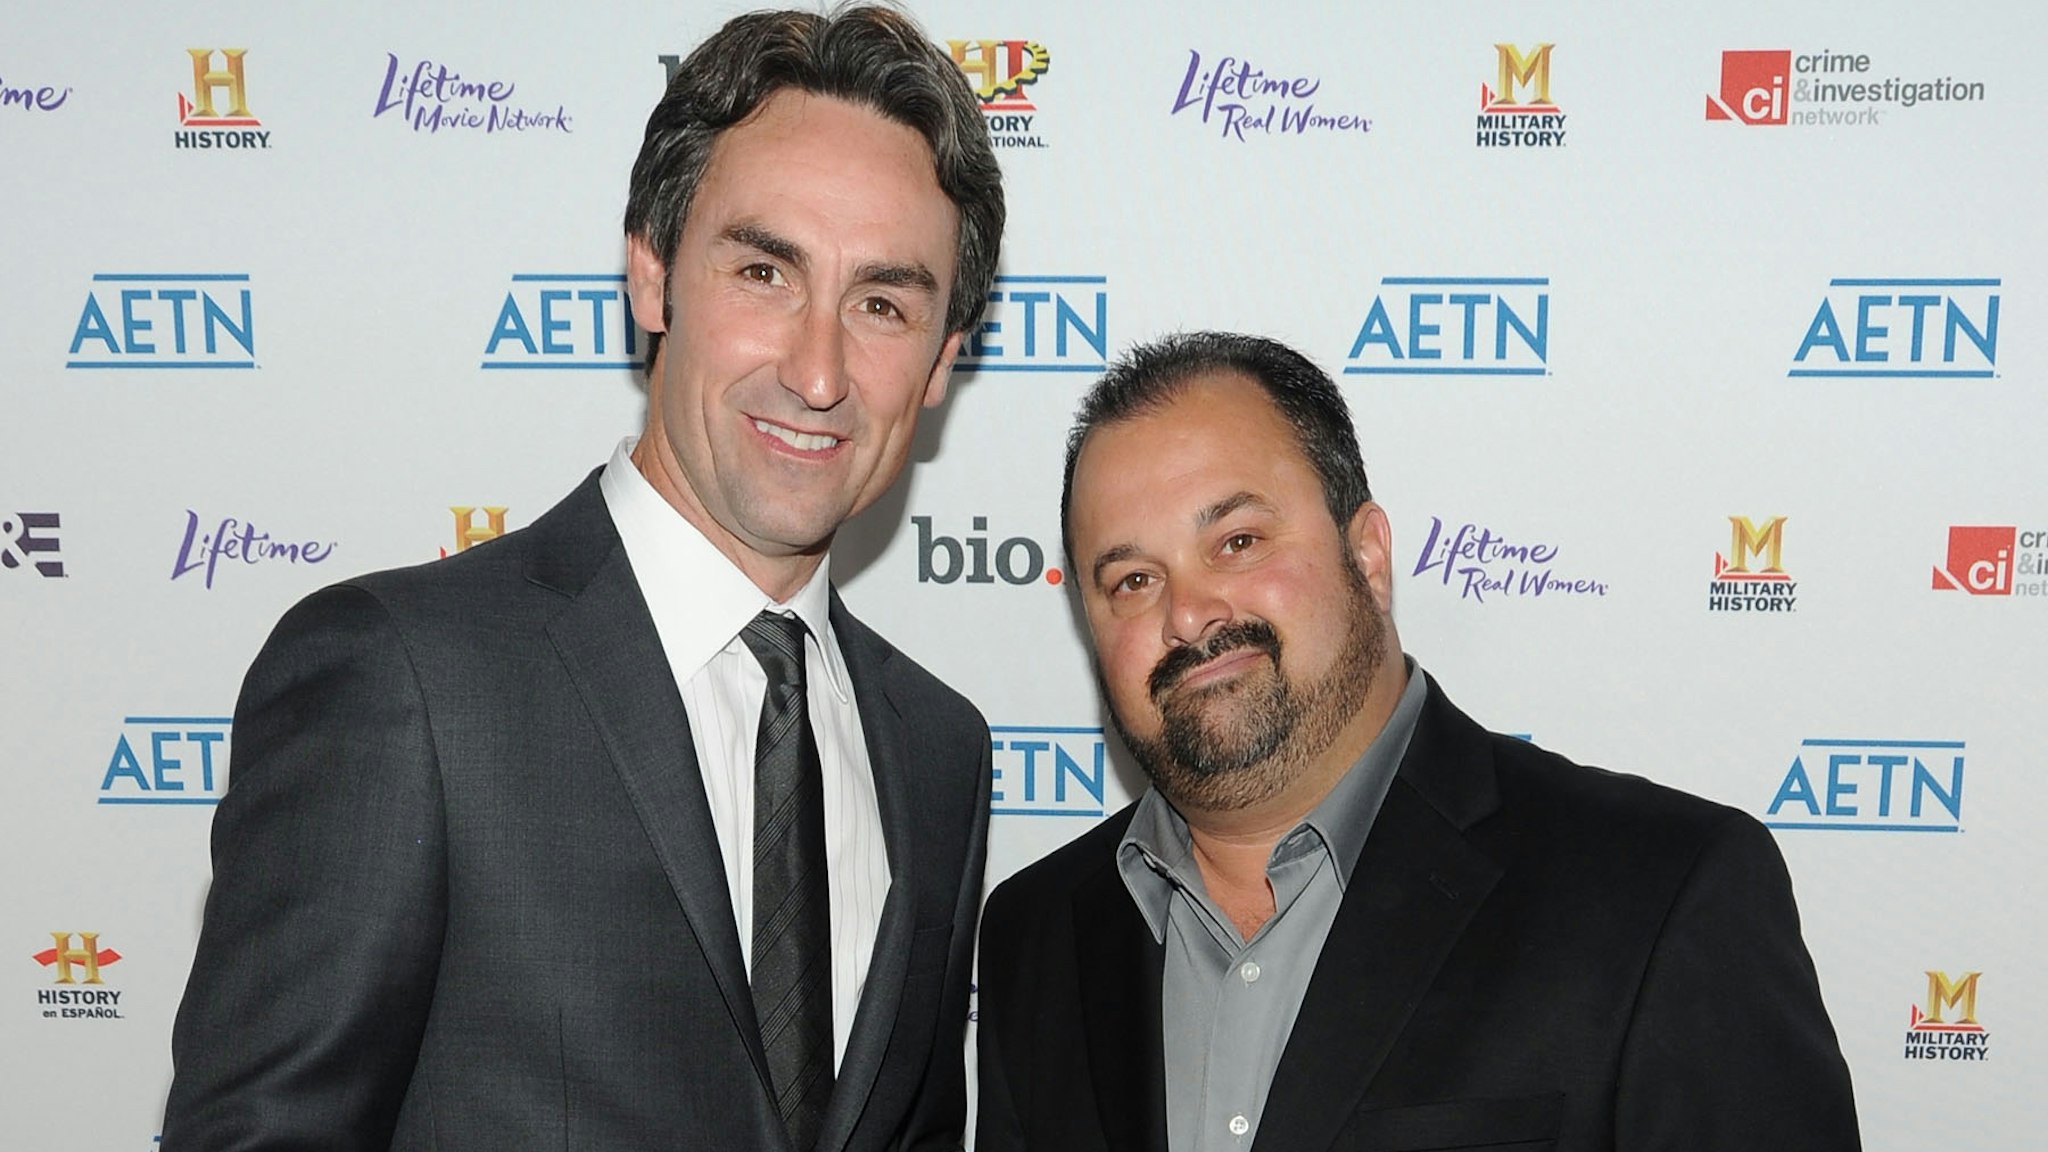 Actors Mike Wolfe and Frank Fritz attend the 2010 A&E Upfront at the IAC Building on May 5, 2010 in New York City.